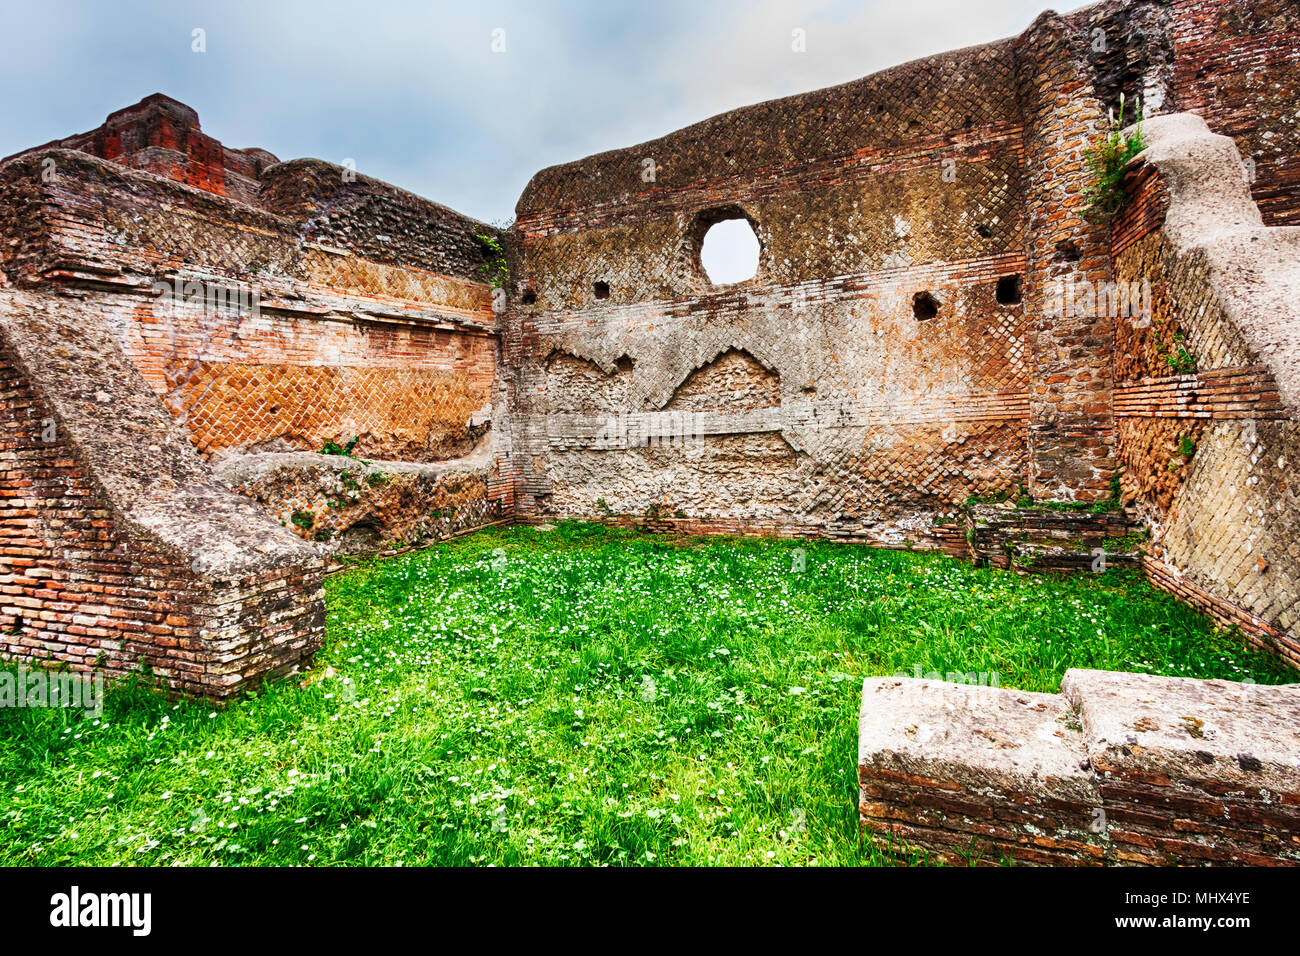 Glimpse of the archaeological Roman empire ruins view in Ostia Antica - Rome - Italy Stock Photo